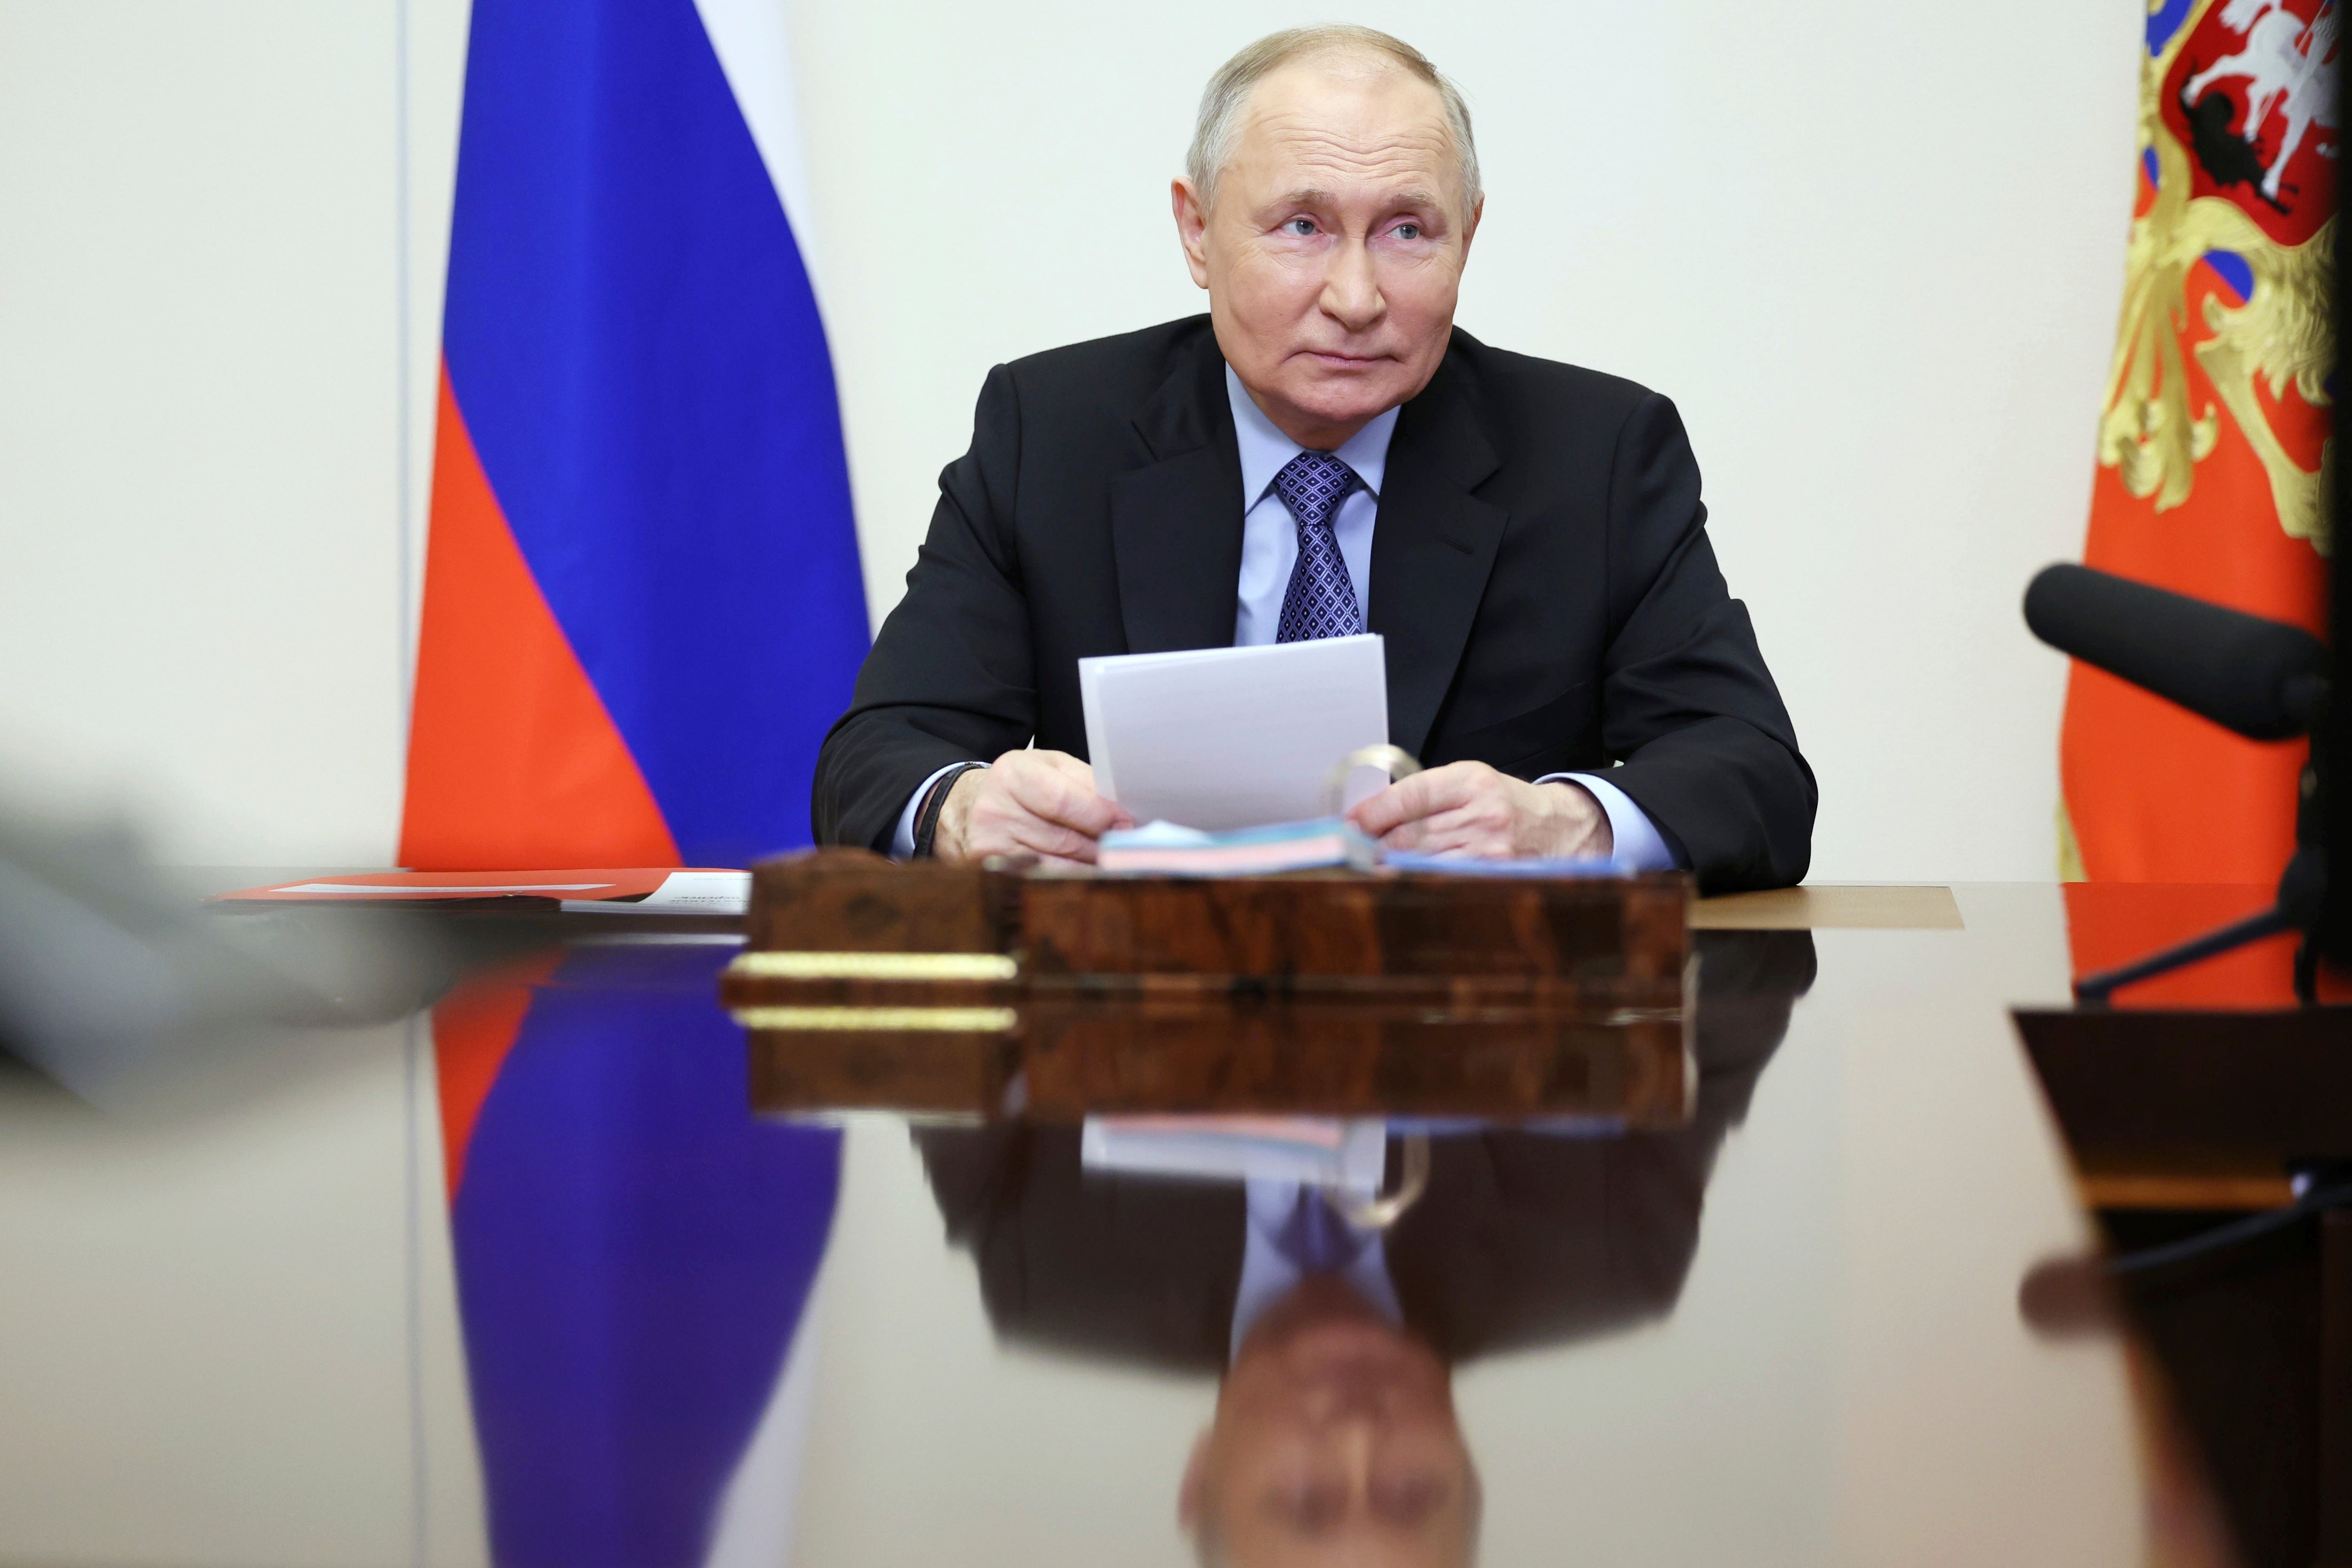 Russian President Vladimir Putin chairs the Security Council meeting